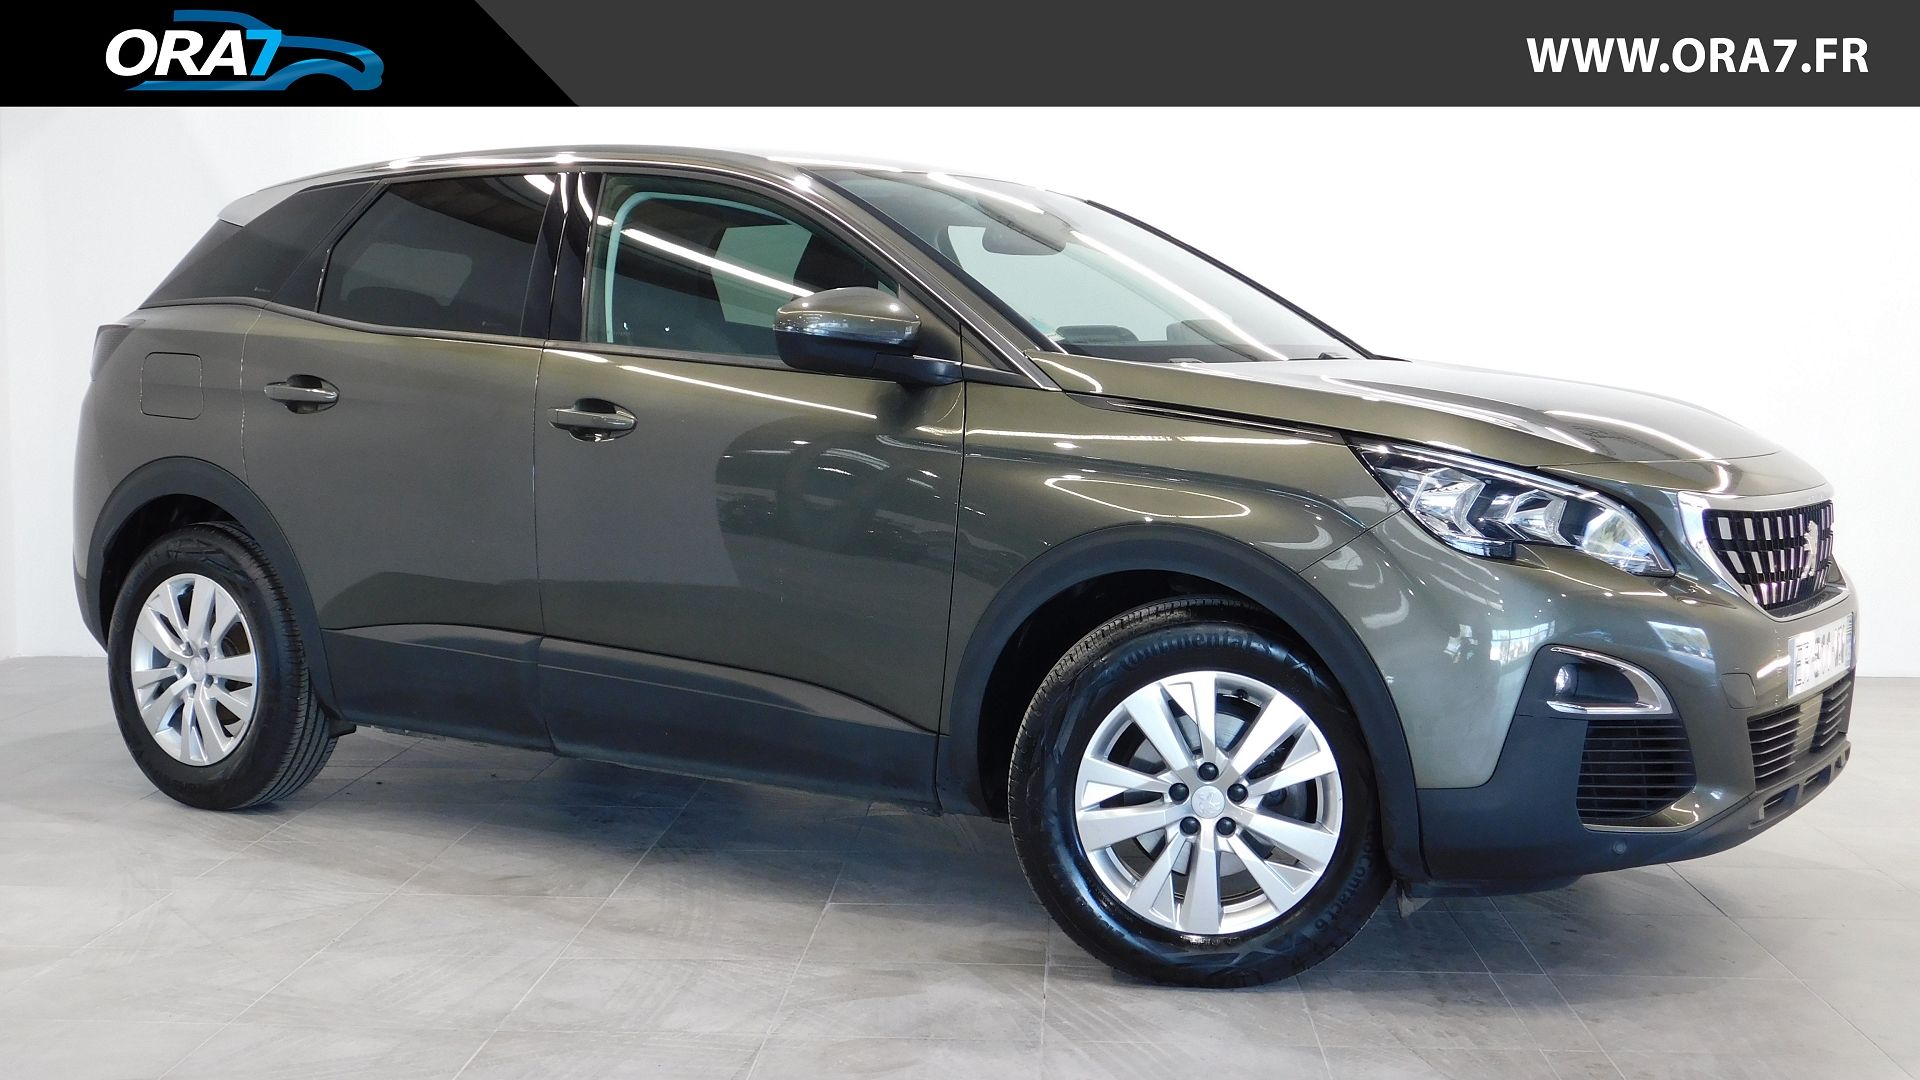 PEUGEOT 3008 1.6 BLUEHDI 120CH ACTIVE BUSINESS S&S BASSE CONSOMMATION